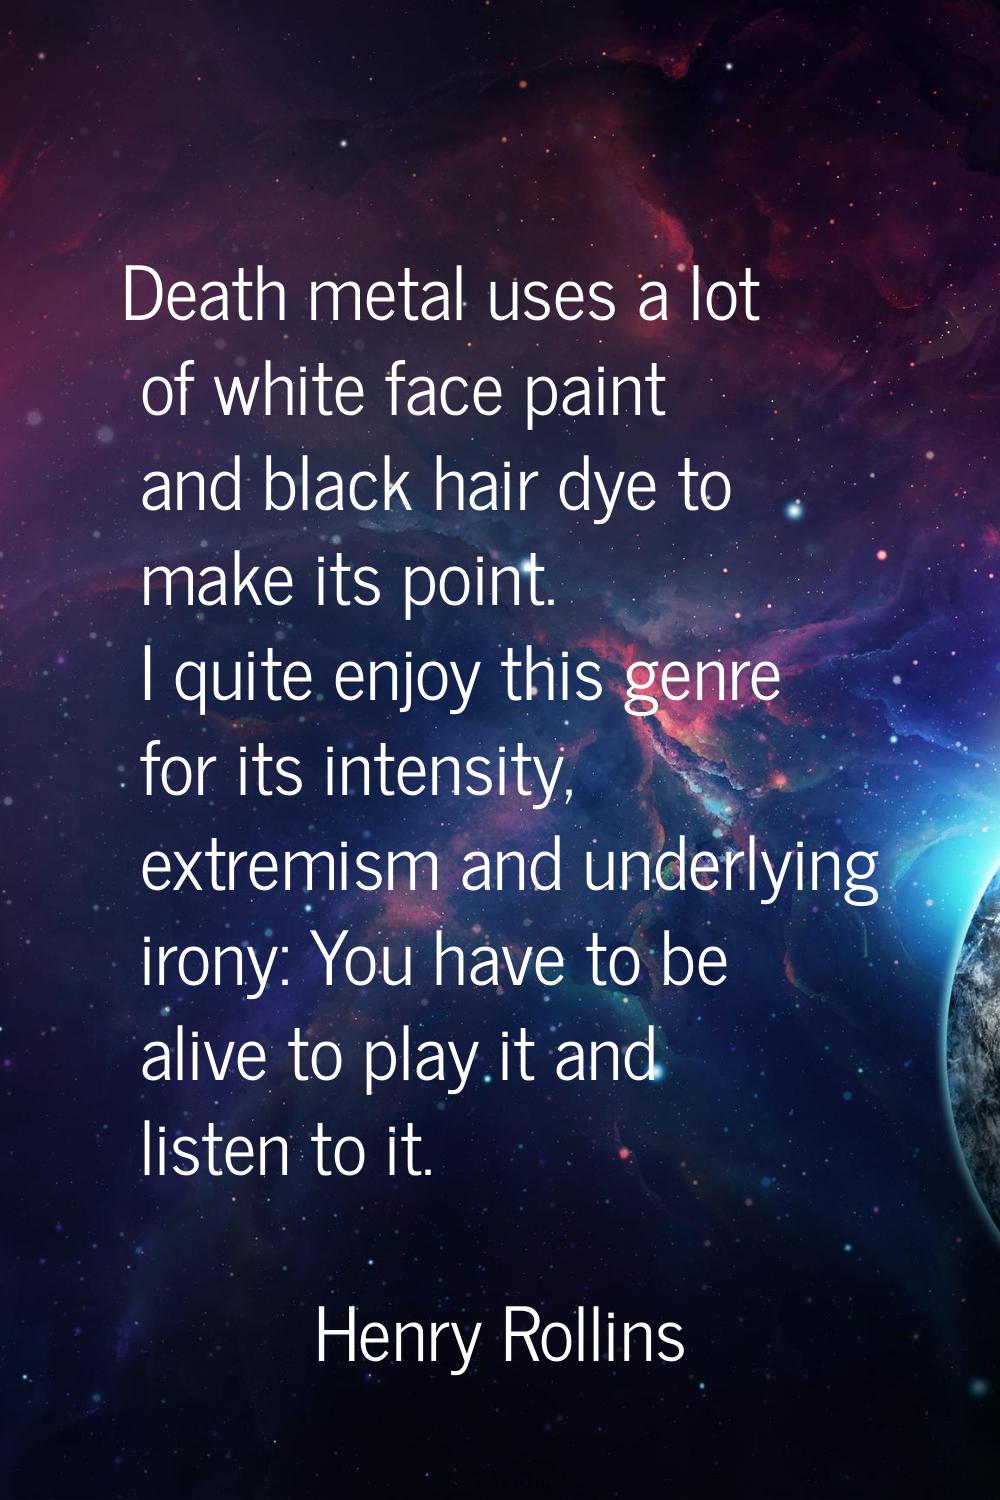 Death metal uses a lot of white face paint and black hair dye to make its point. I quite enjoy this